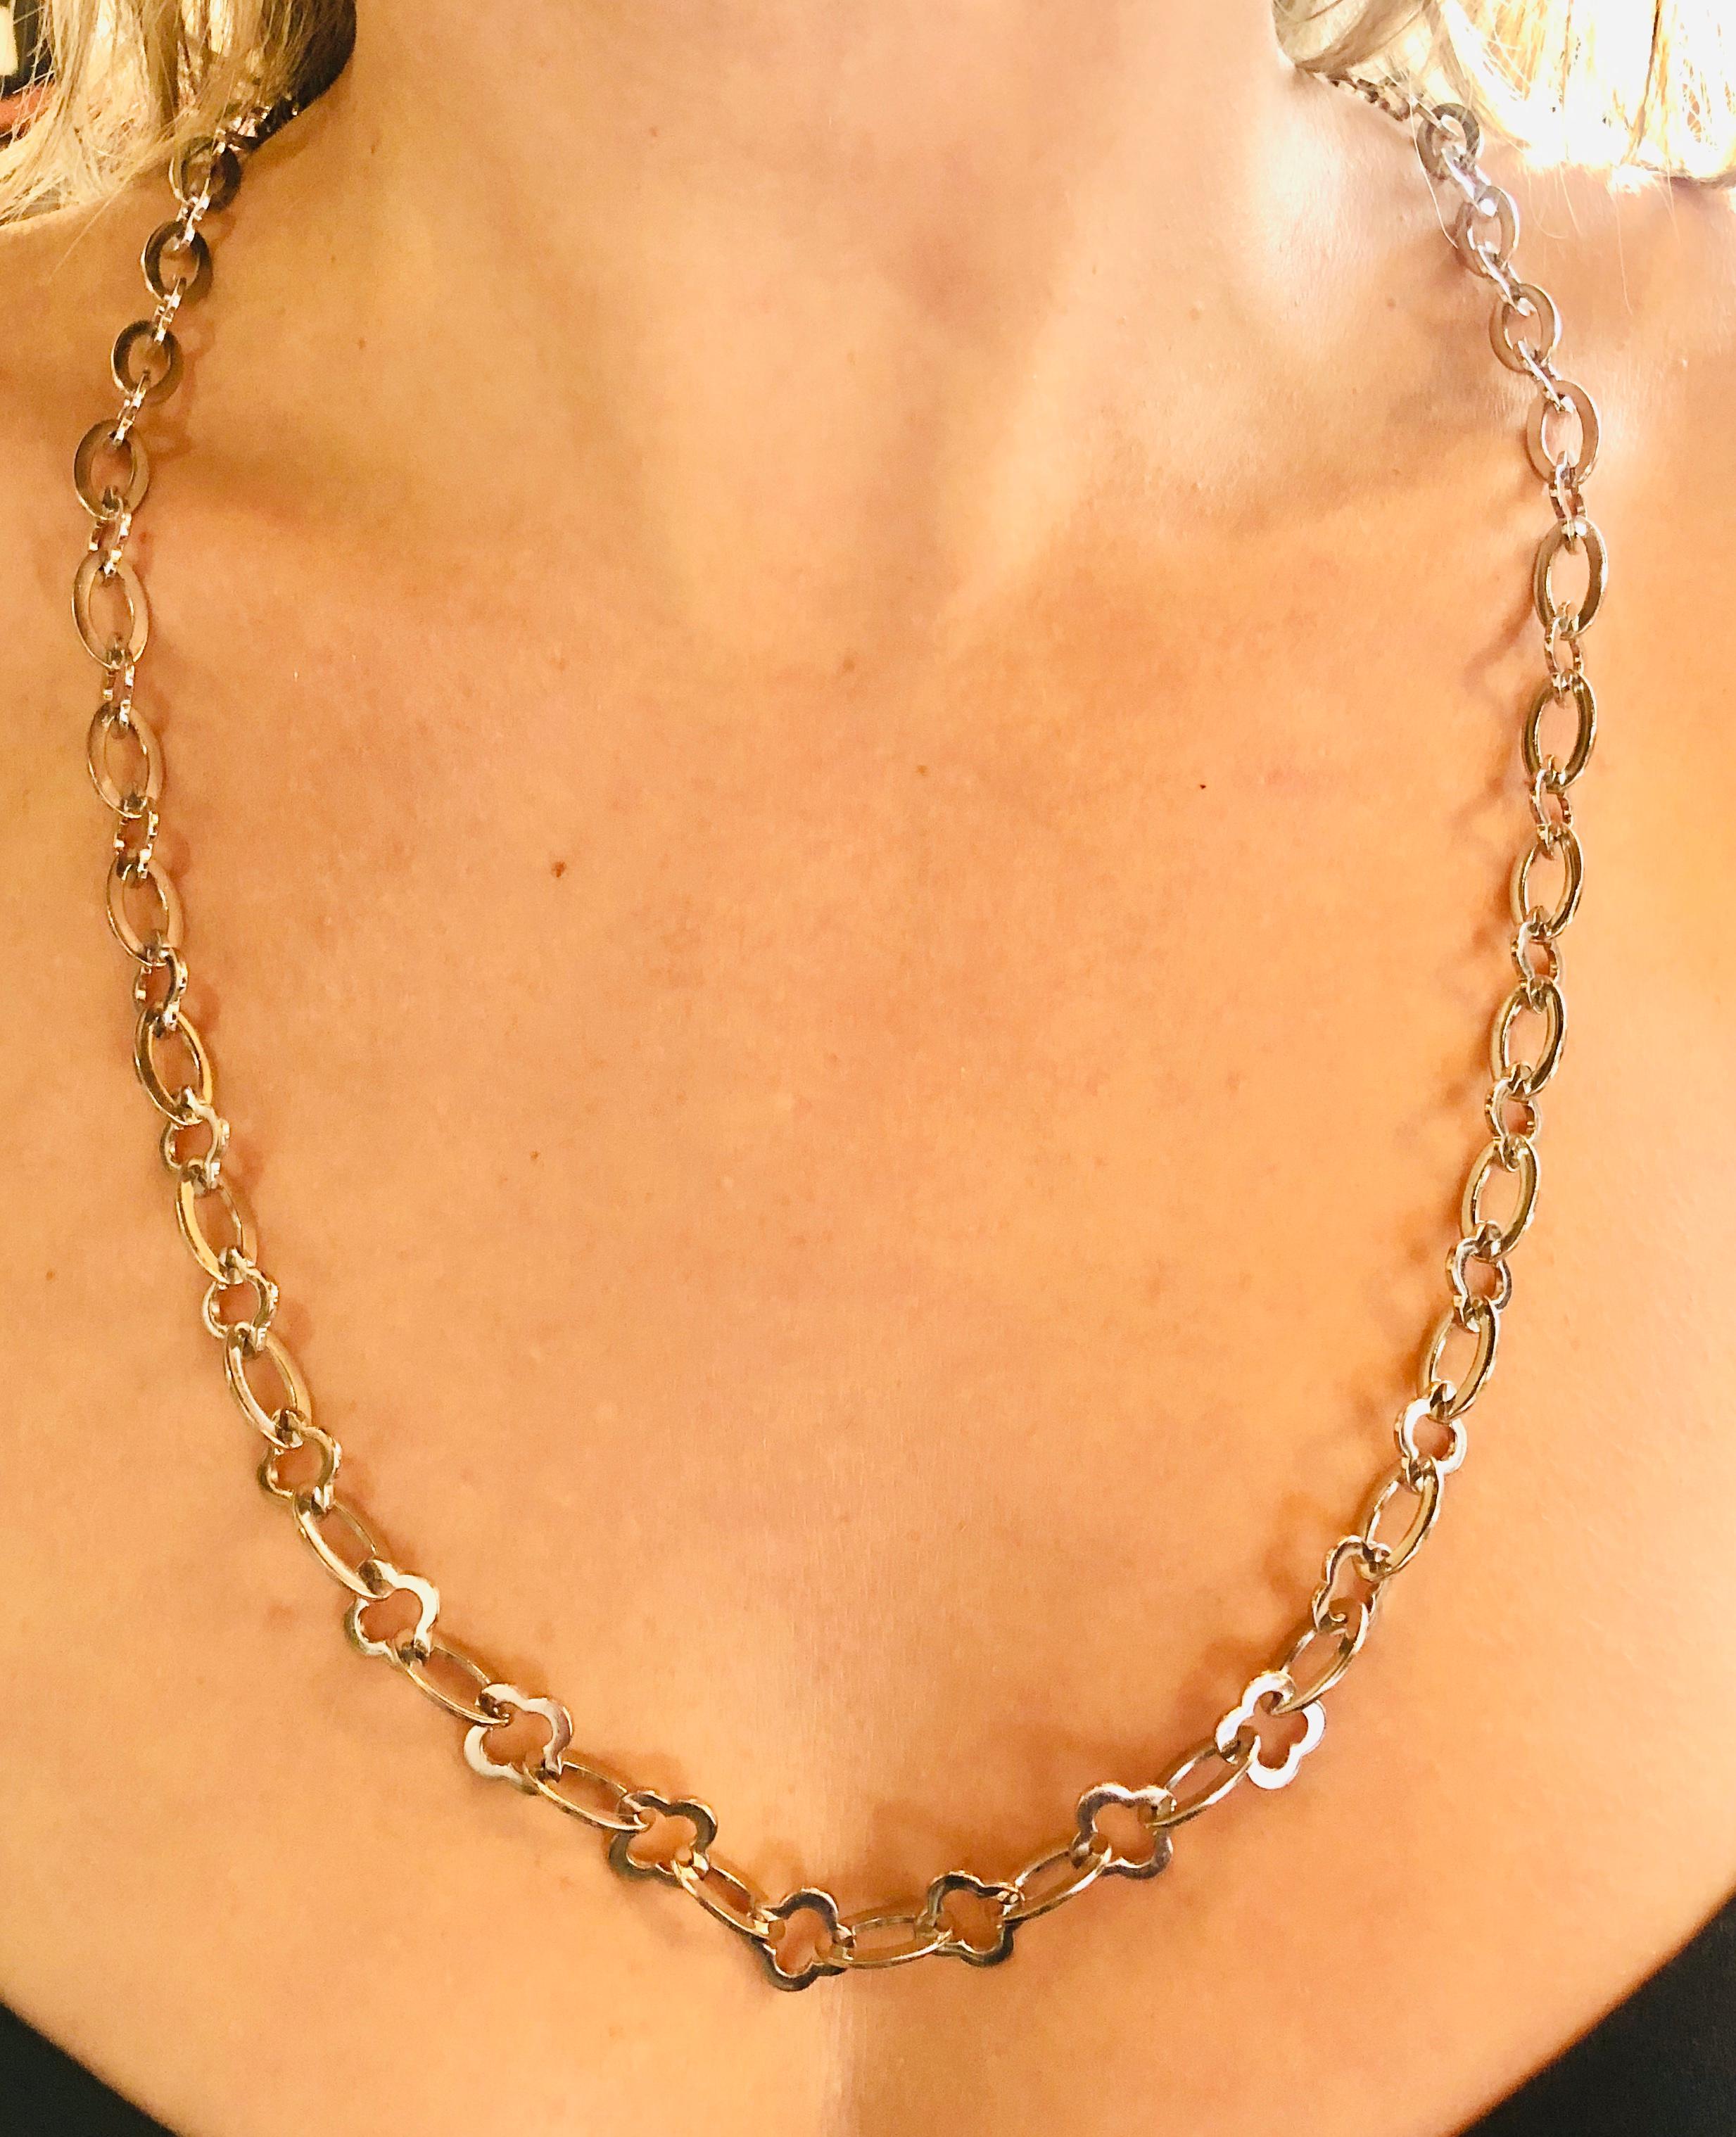 Van Cleef and Arpels Discontinued Byzantine Alhambra Articulated Chain in White Gold. 32 inch long chain. The weight of the chain is 103 grams. Serial number BL 30349 bears French maker's mark. This chain is in very good condition. 


